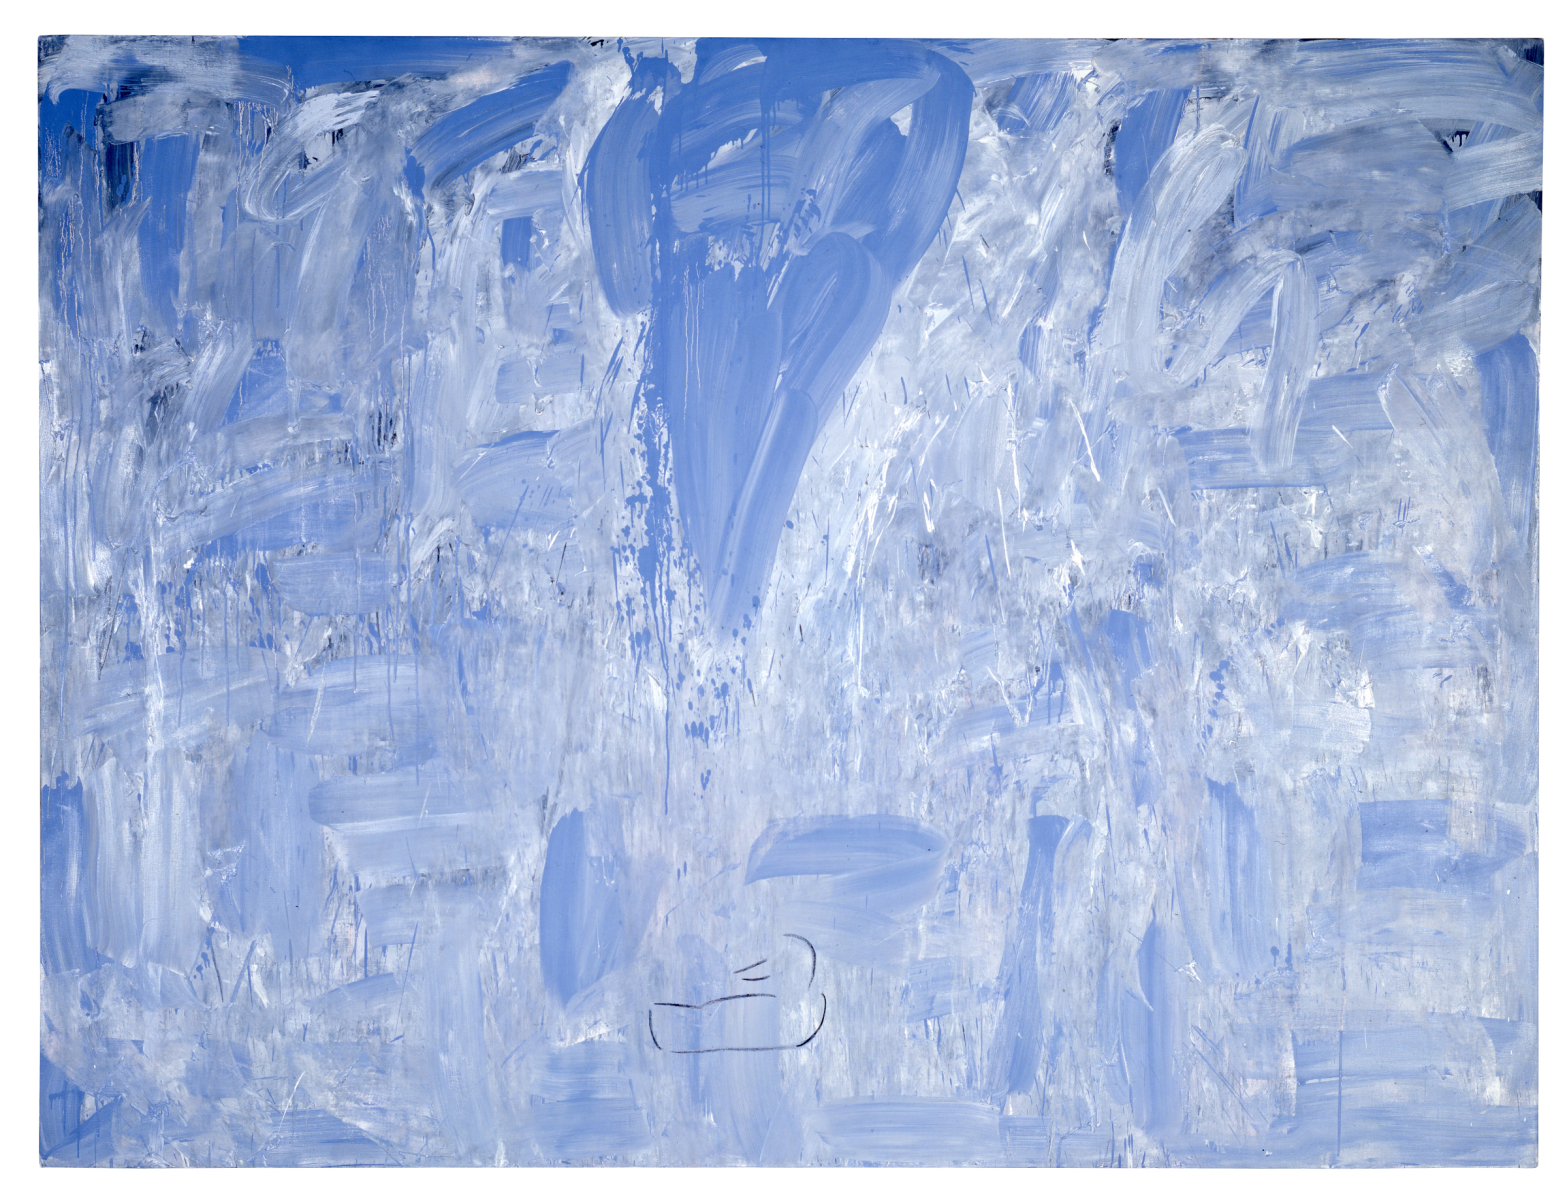 Untitled-95043, 1995, Oil on Canvas, 194x259cm